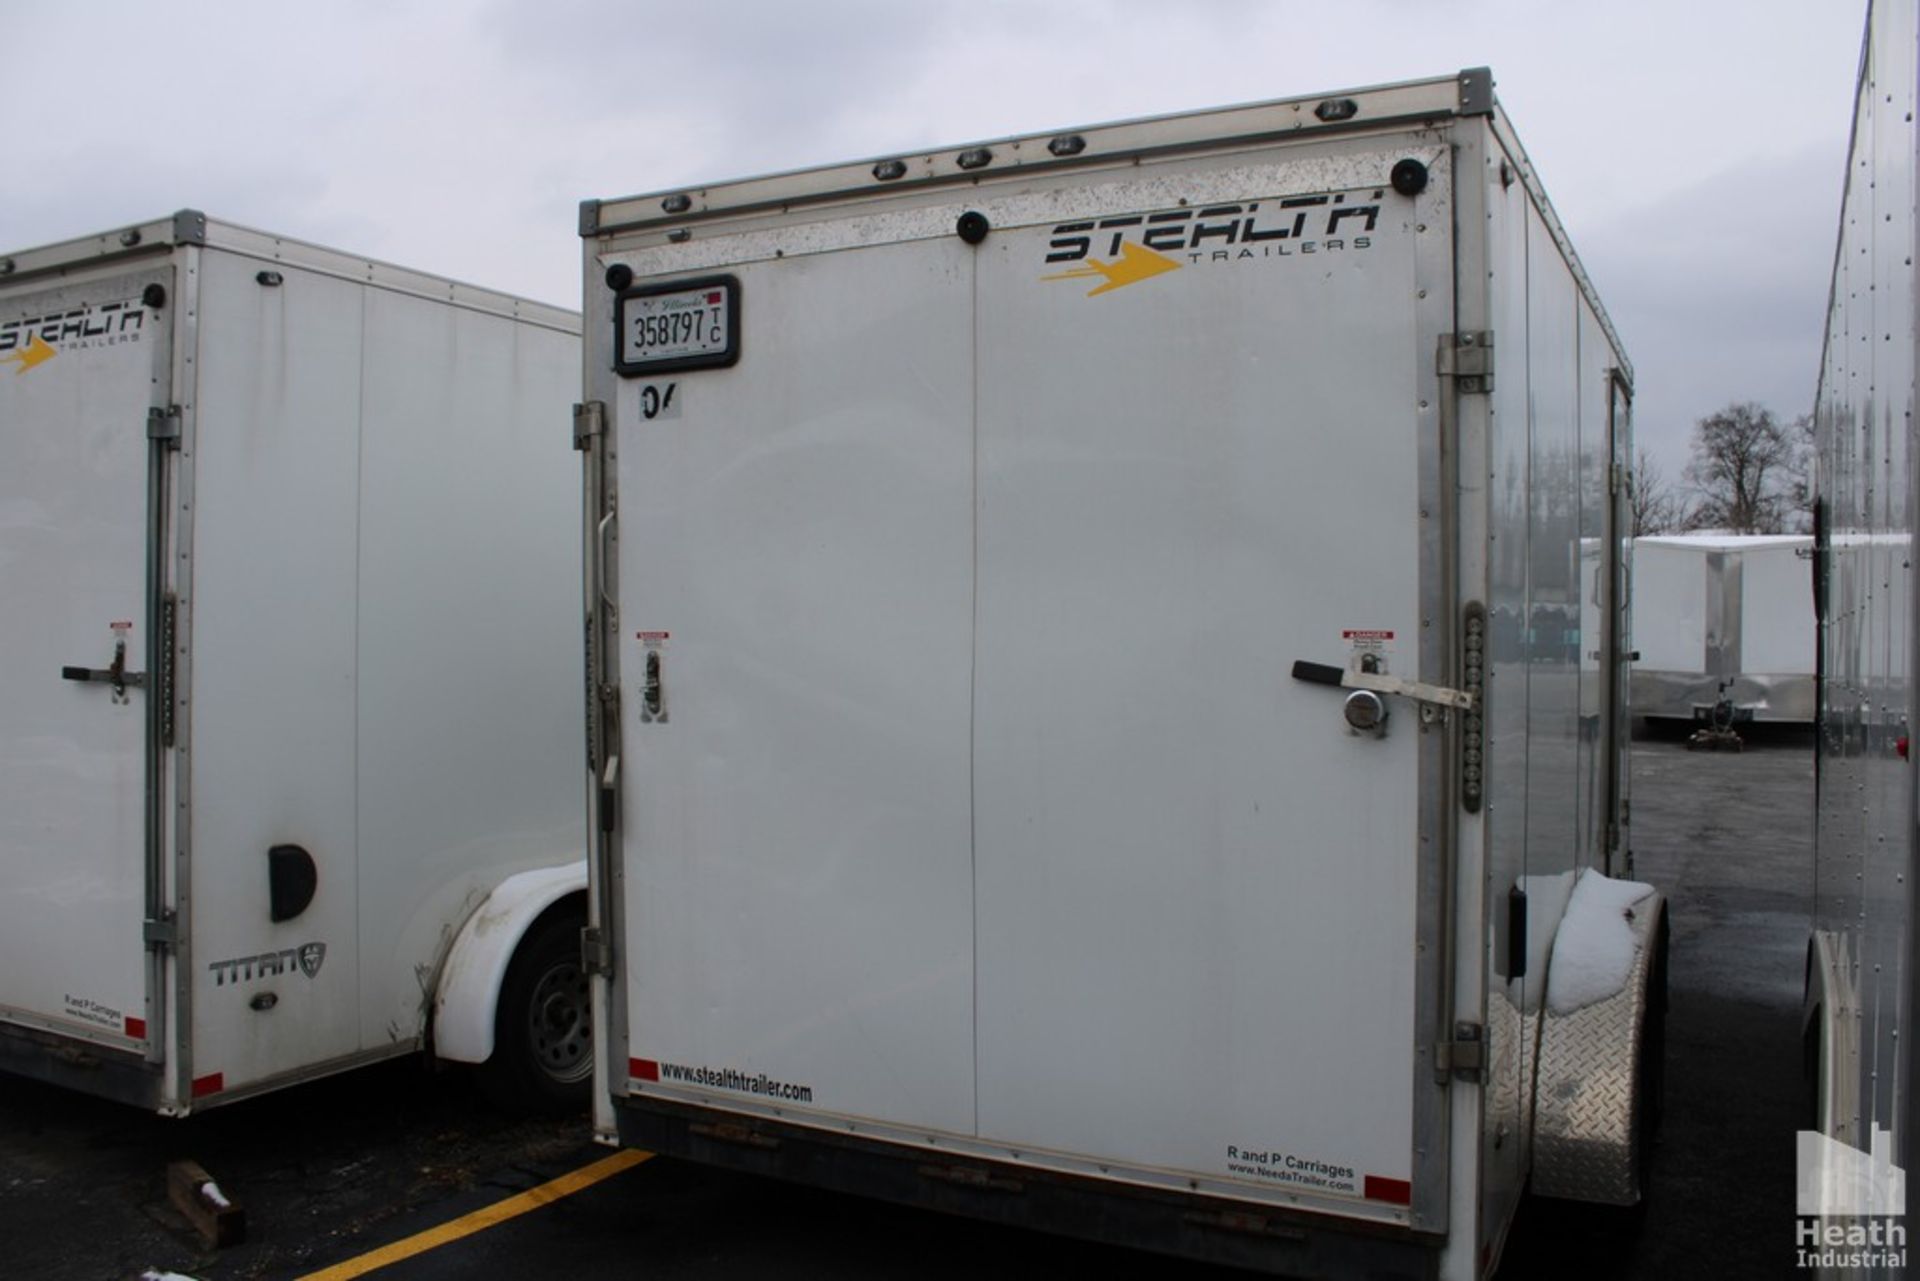 STEALTH 14’ ENCLOSED TRAILER, VIN: 52LBE1423LE077653 (NEW 2020), WITH SIDE DOOR, DROP DOWN BACK - Image 3 of 4